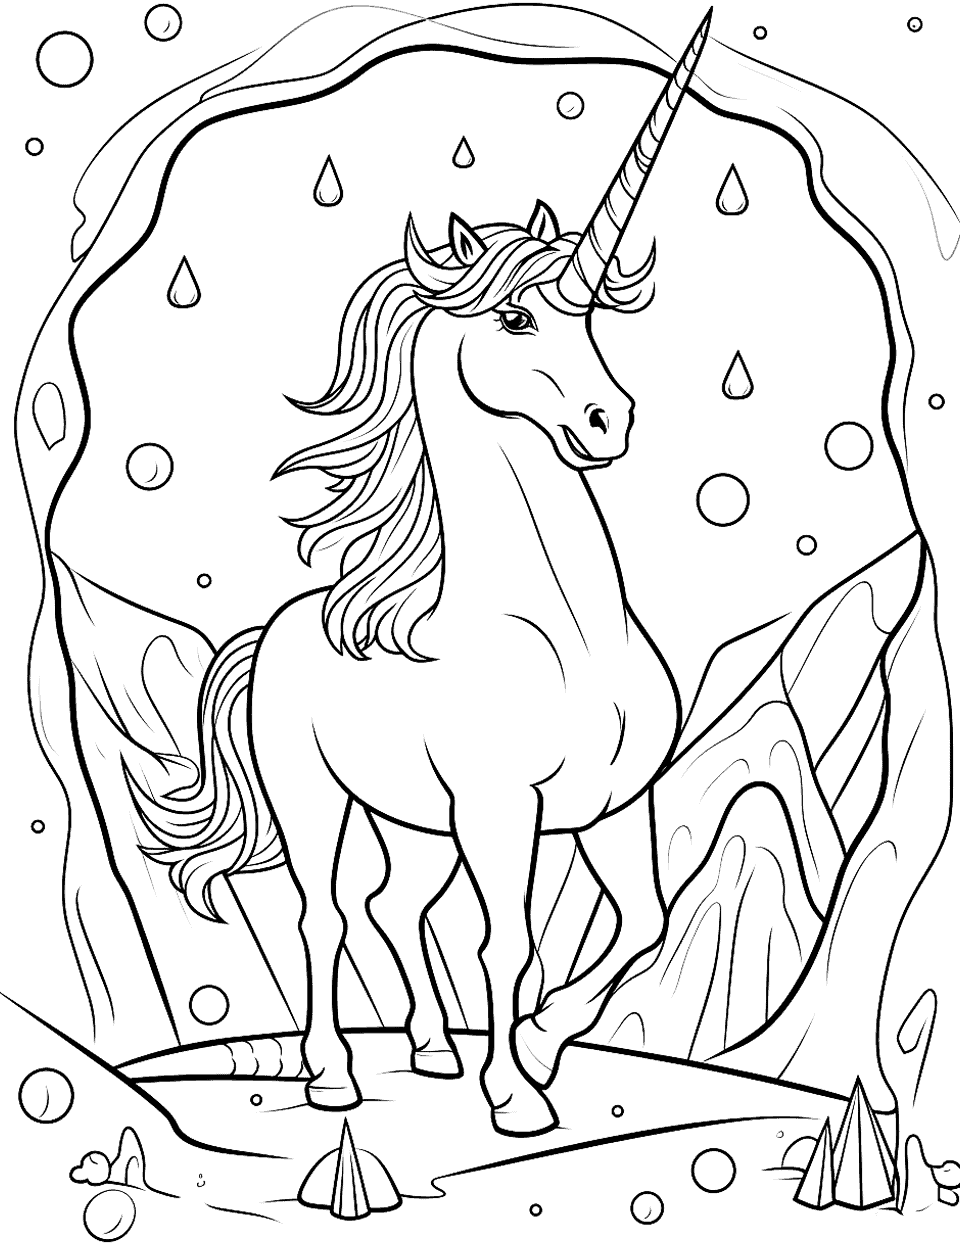 Unicorn and the Crystal Cave Coloring Page - A unicorn in a crystal cave, surrounded by glowing crystals and stalactites.